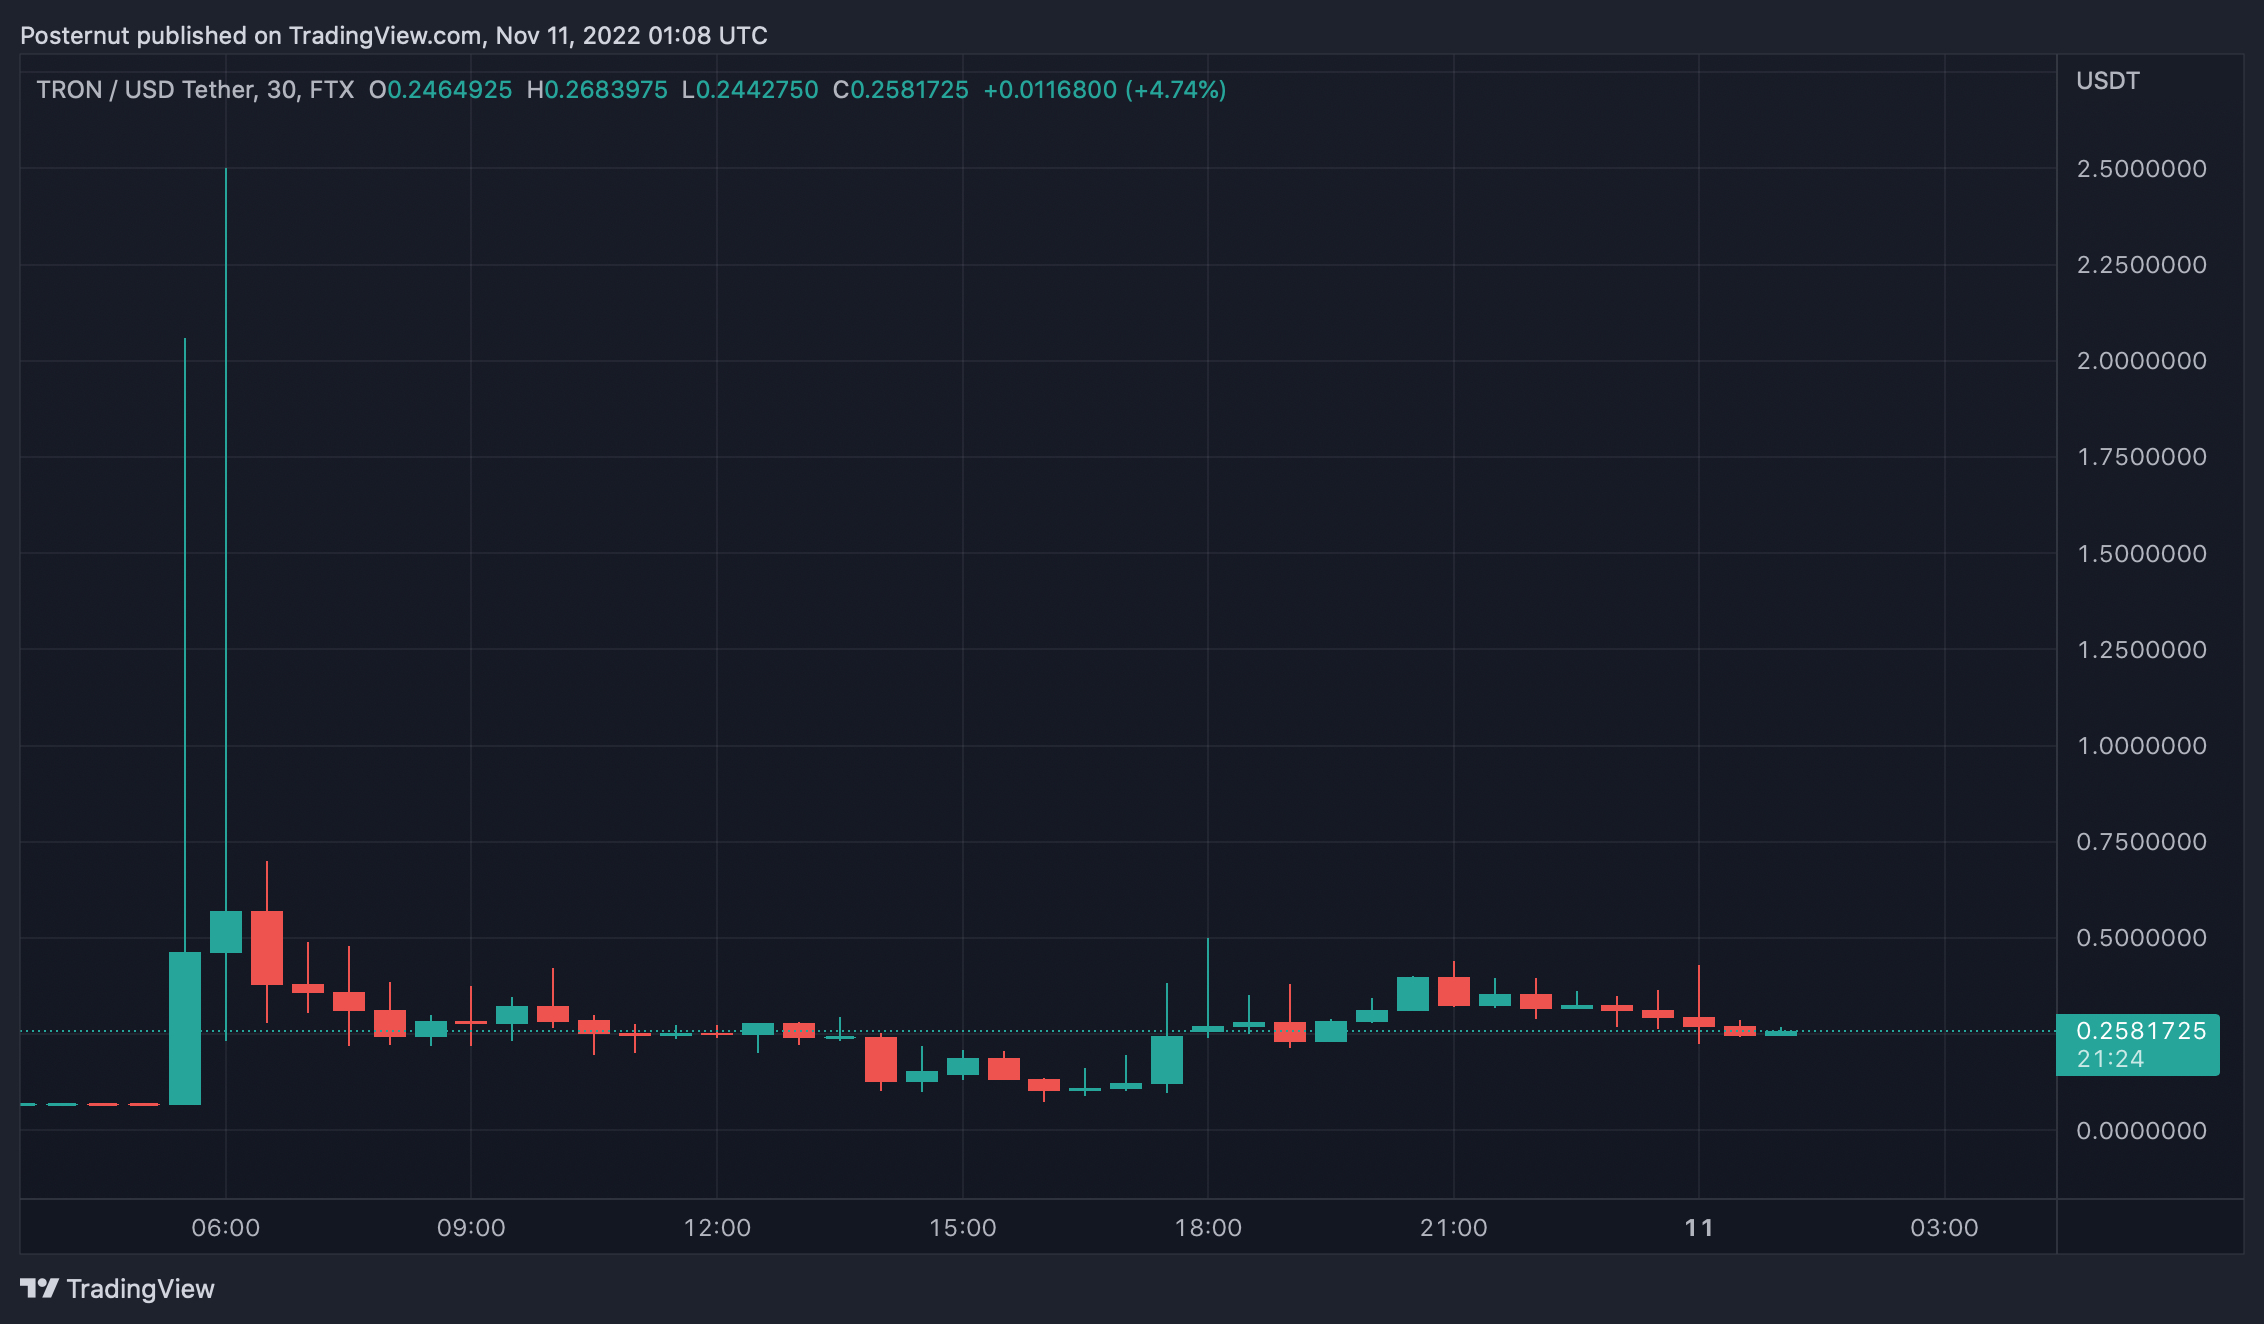 Tron's USD Exchange Rate Jumps 285% Higher on FTX After Exchange Brokered Deal With Tron